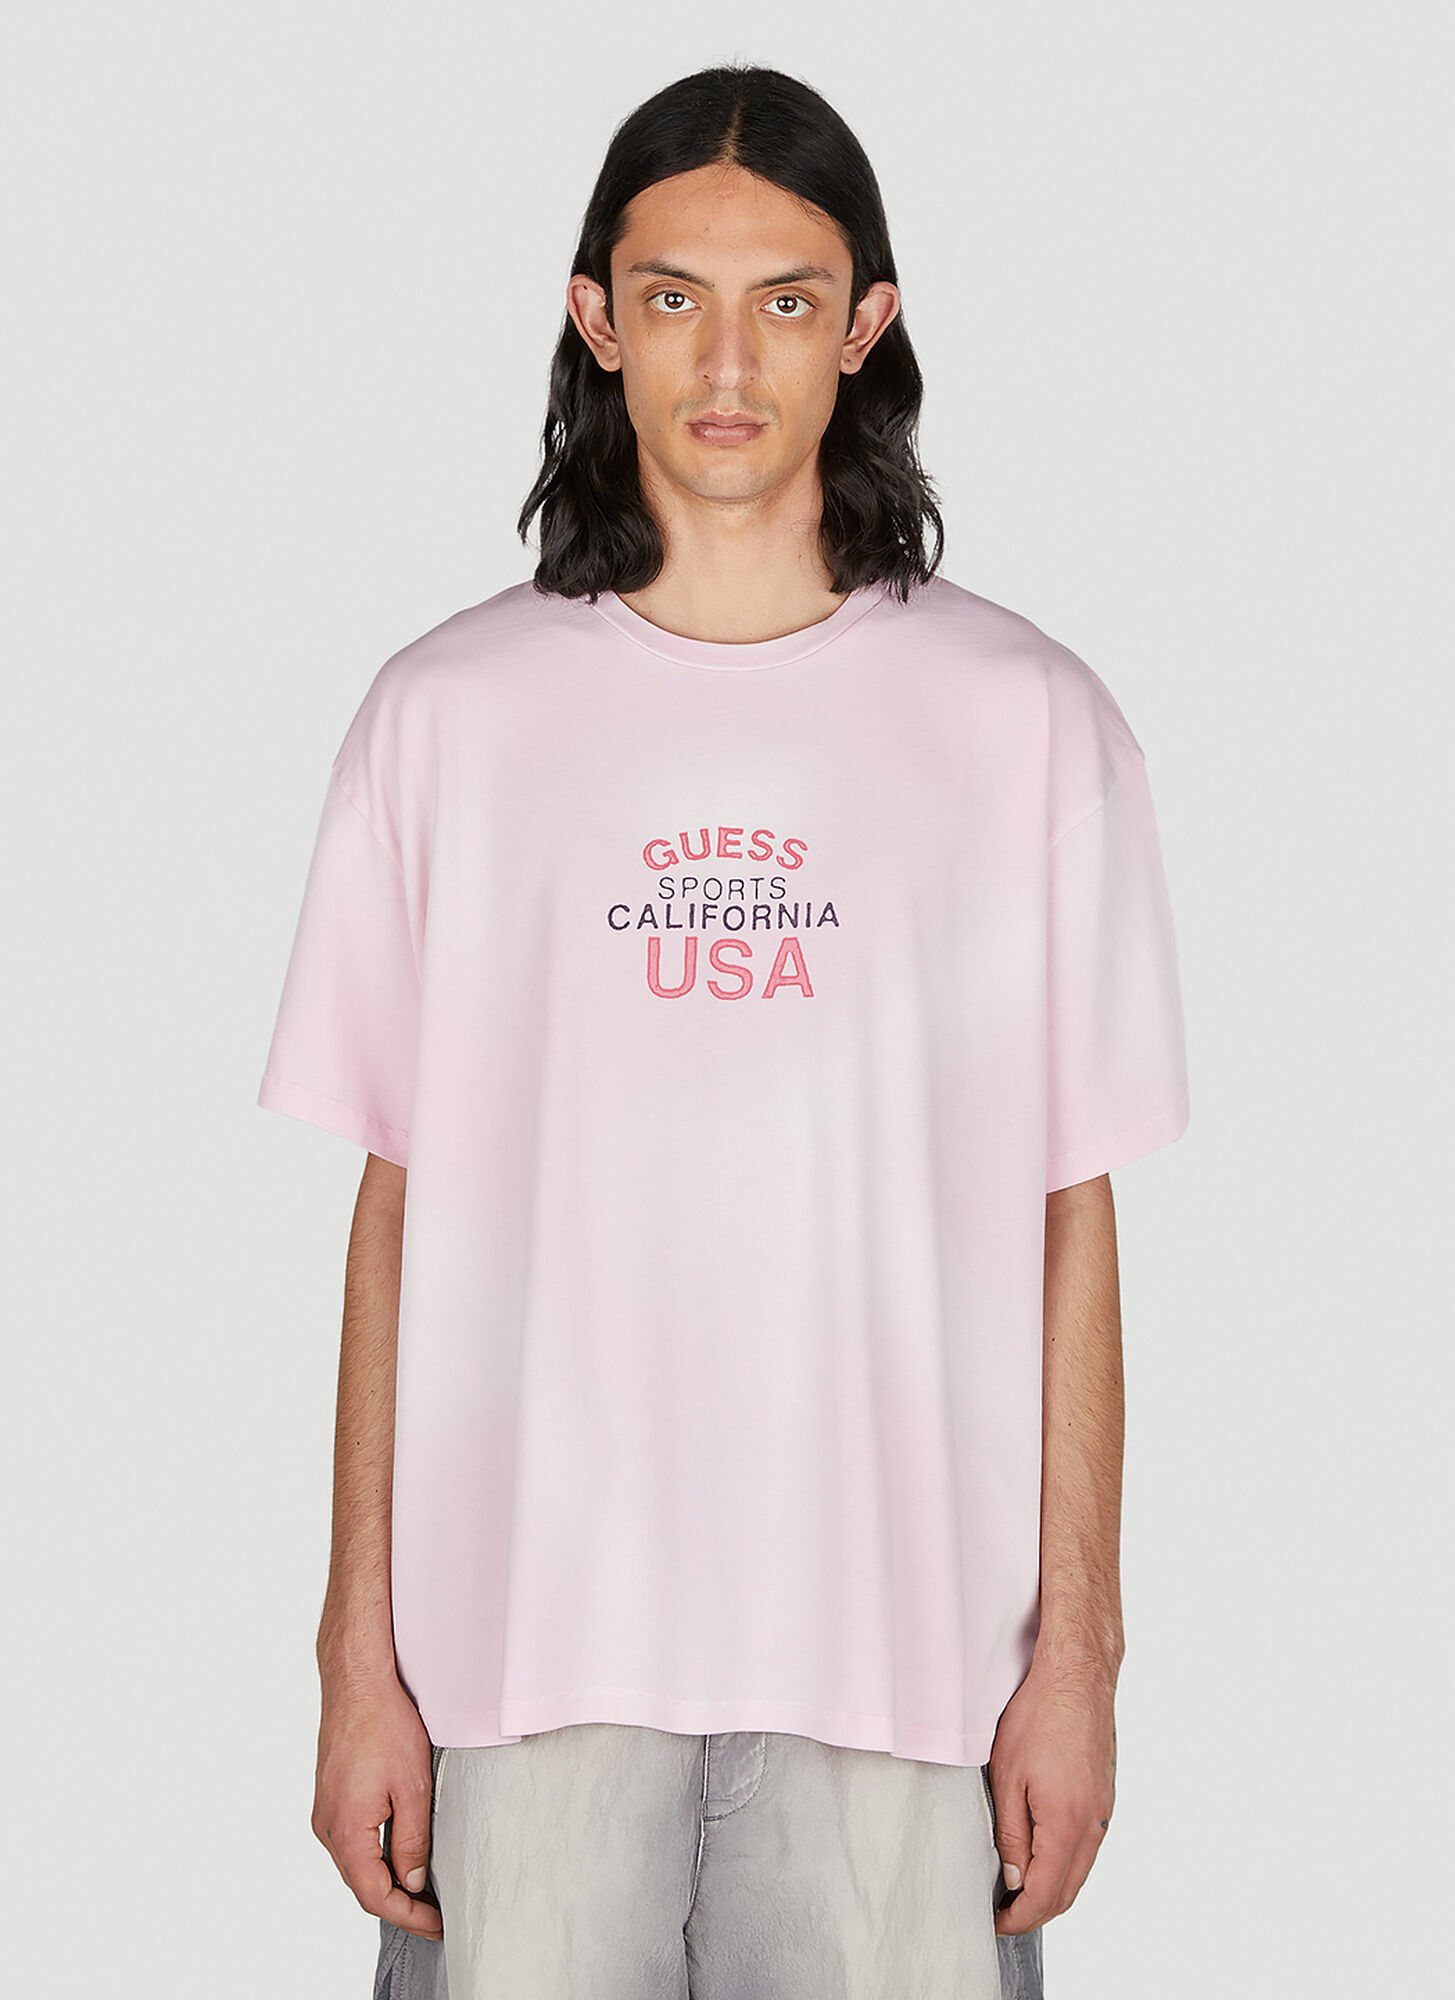 GUESS USA FADED GRAPHIC T-SHIRT